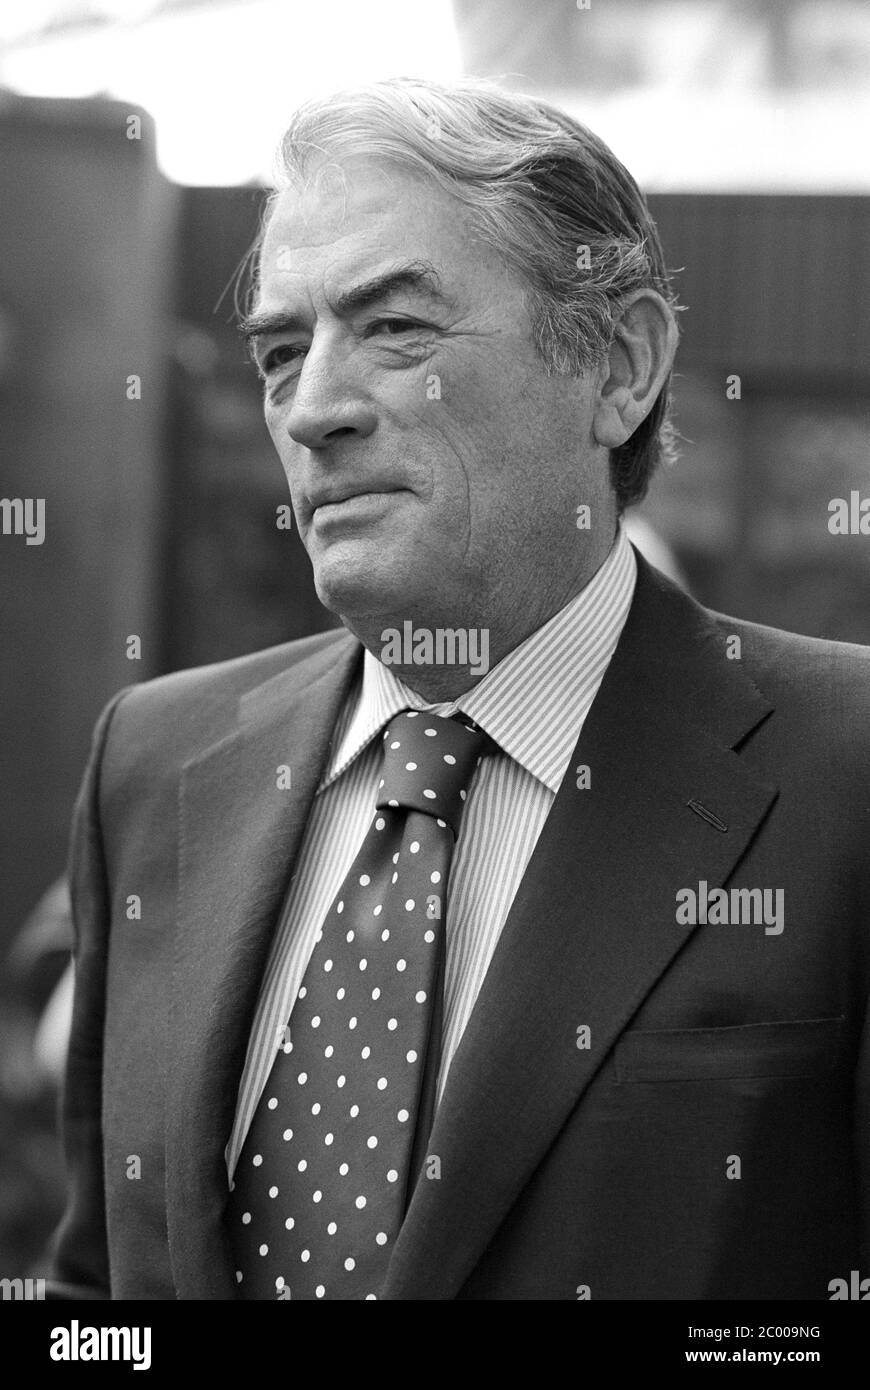 LONDON, UK. Aug 1980: Actor Gregory Peck at photocall for 'Sea Wolves' at the Inn on the Park Hotel in London. © Paul Smith/Featureflash Stock Photo